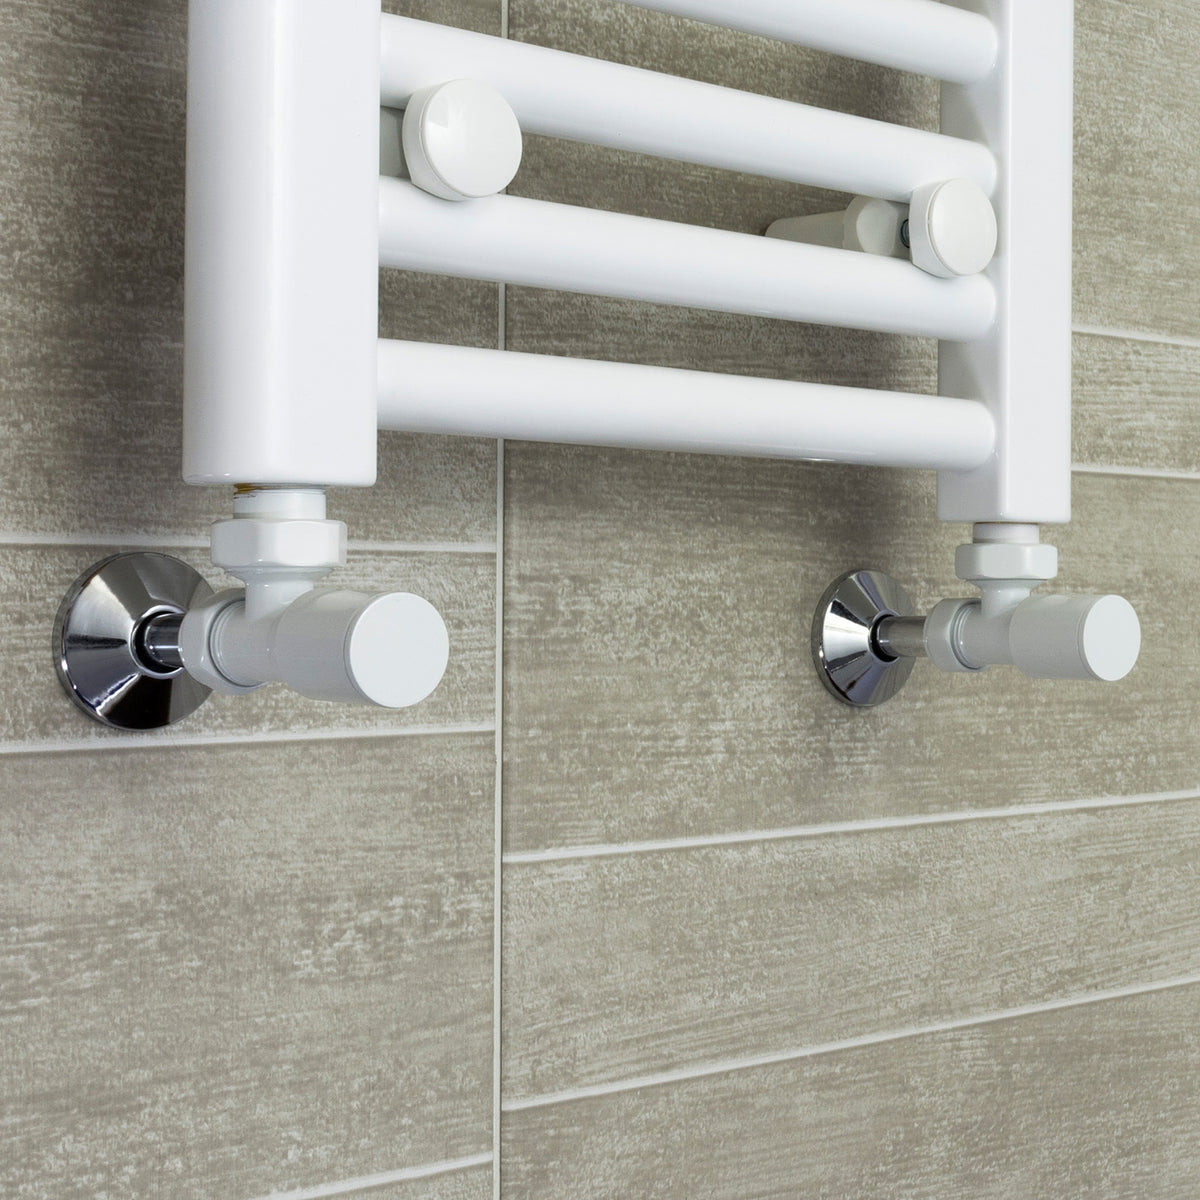 700mm Wide 1500mm High White Towel Rail Radiator With Angled Valve